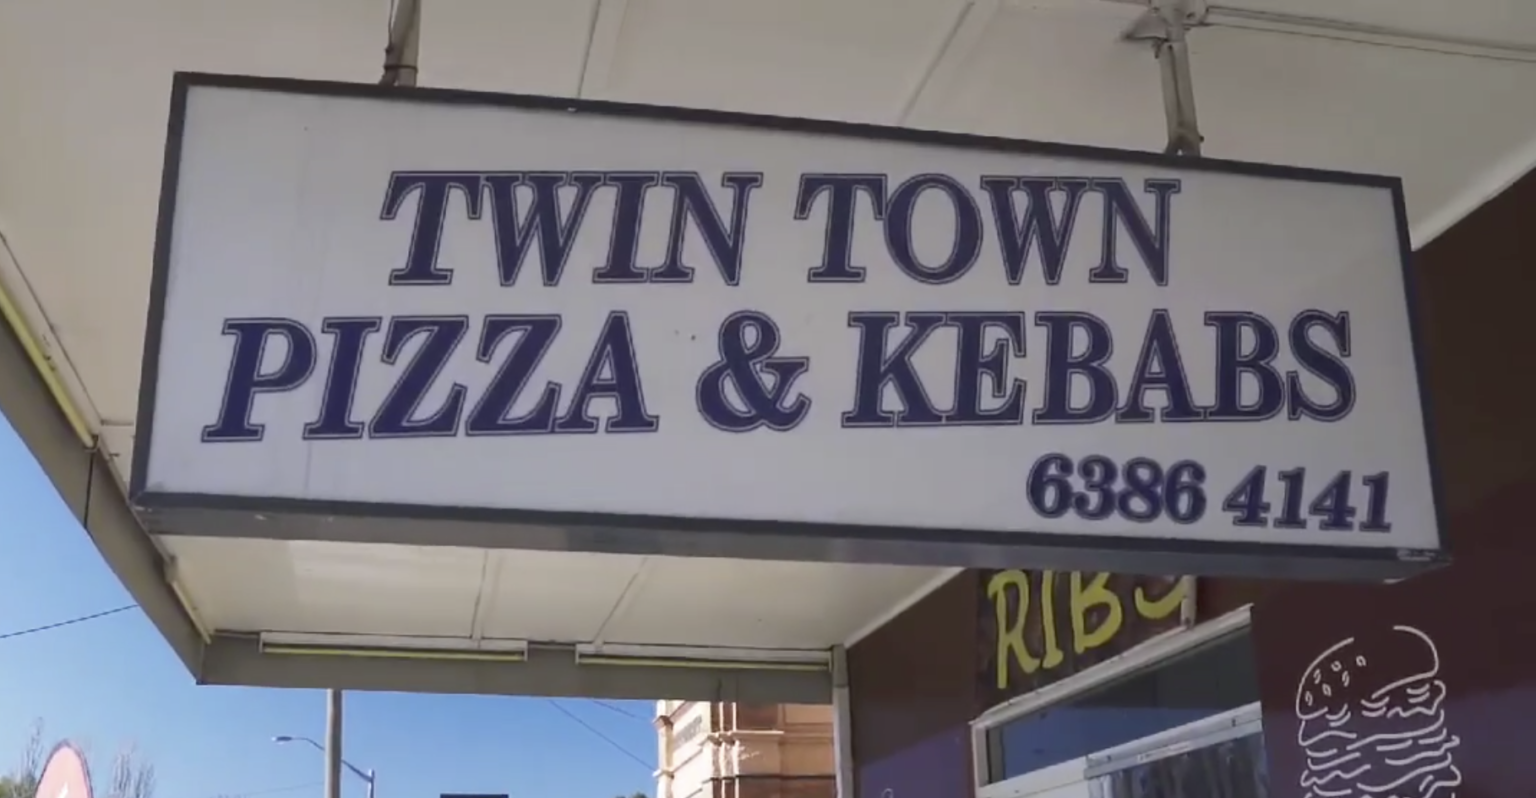 old pizza restaurants near twin towers memorial